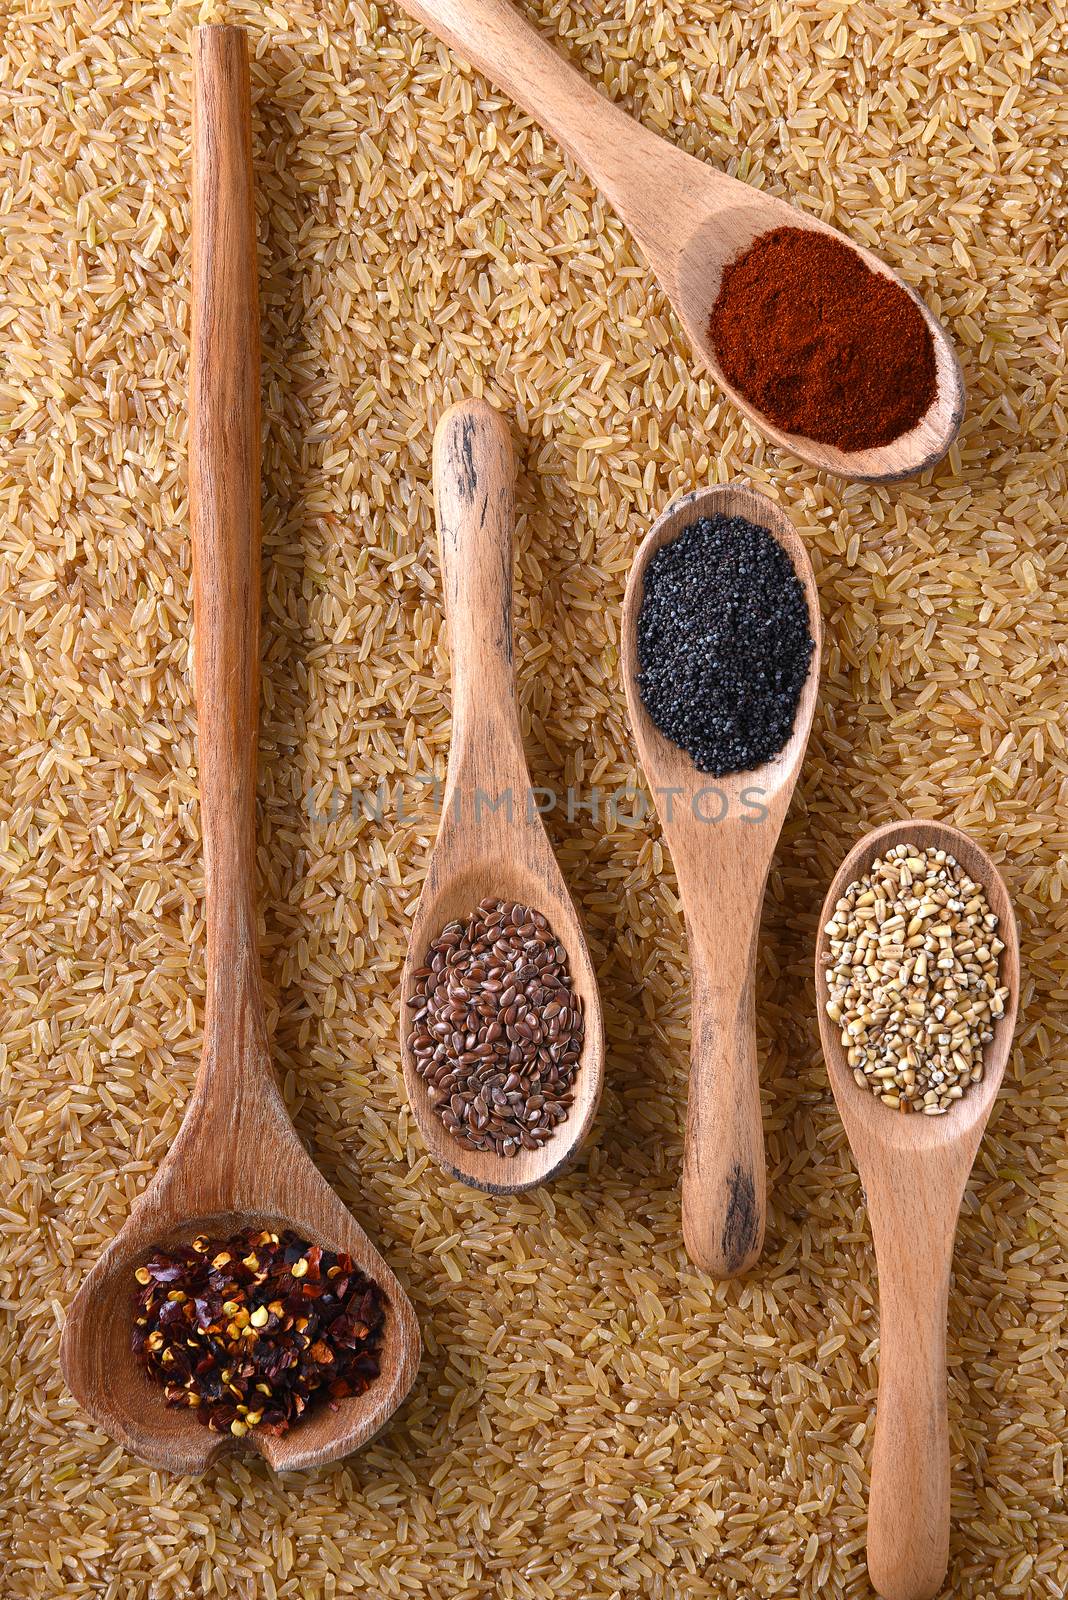 Grains and Spice on Spoons by sCukrov